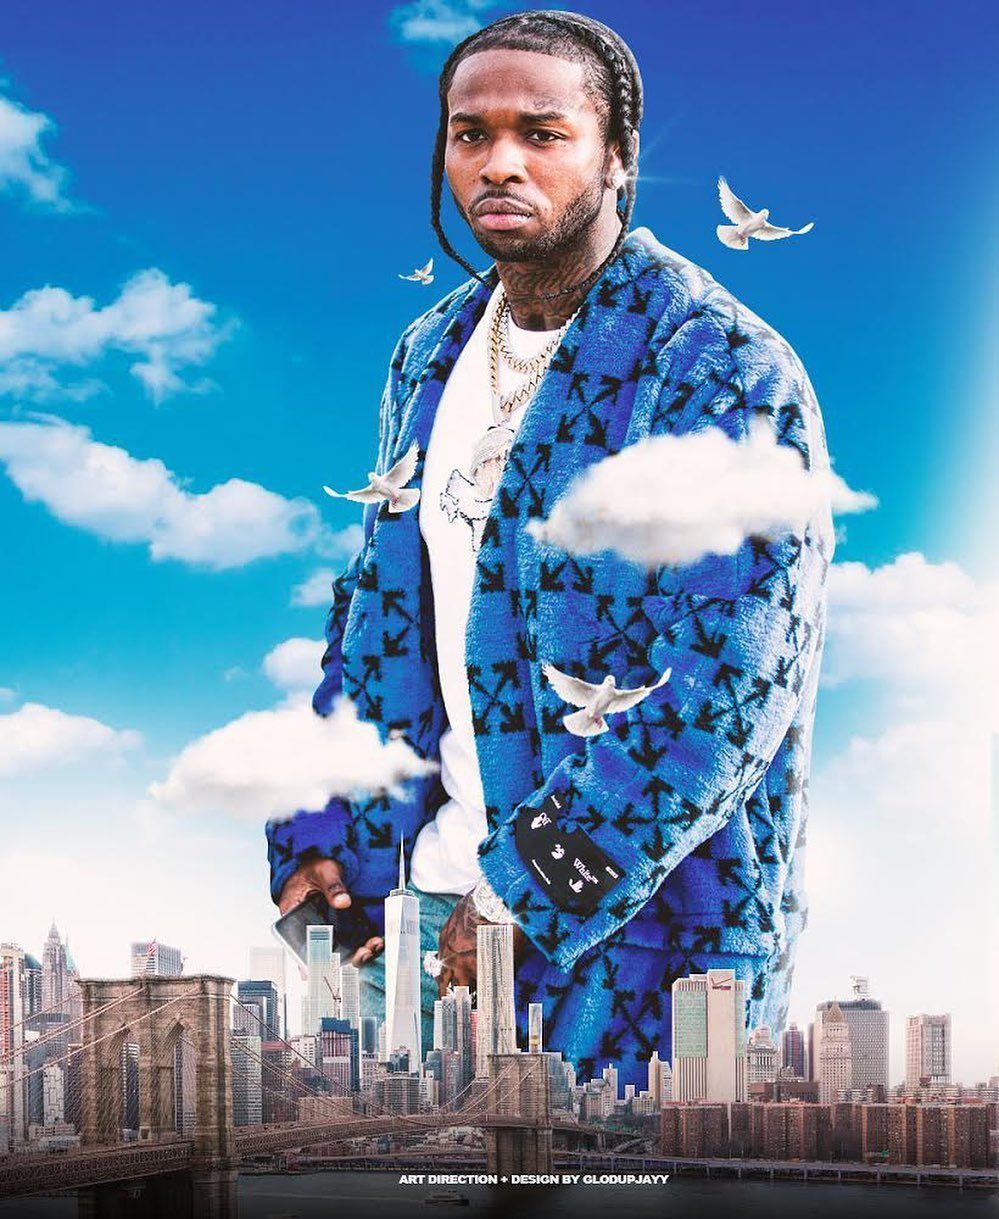 A poster for the movie, featuring rapper in blue jacket - Pop Smoke